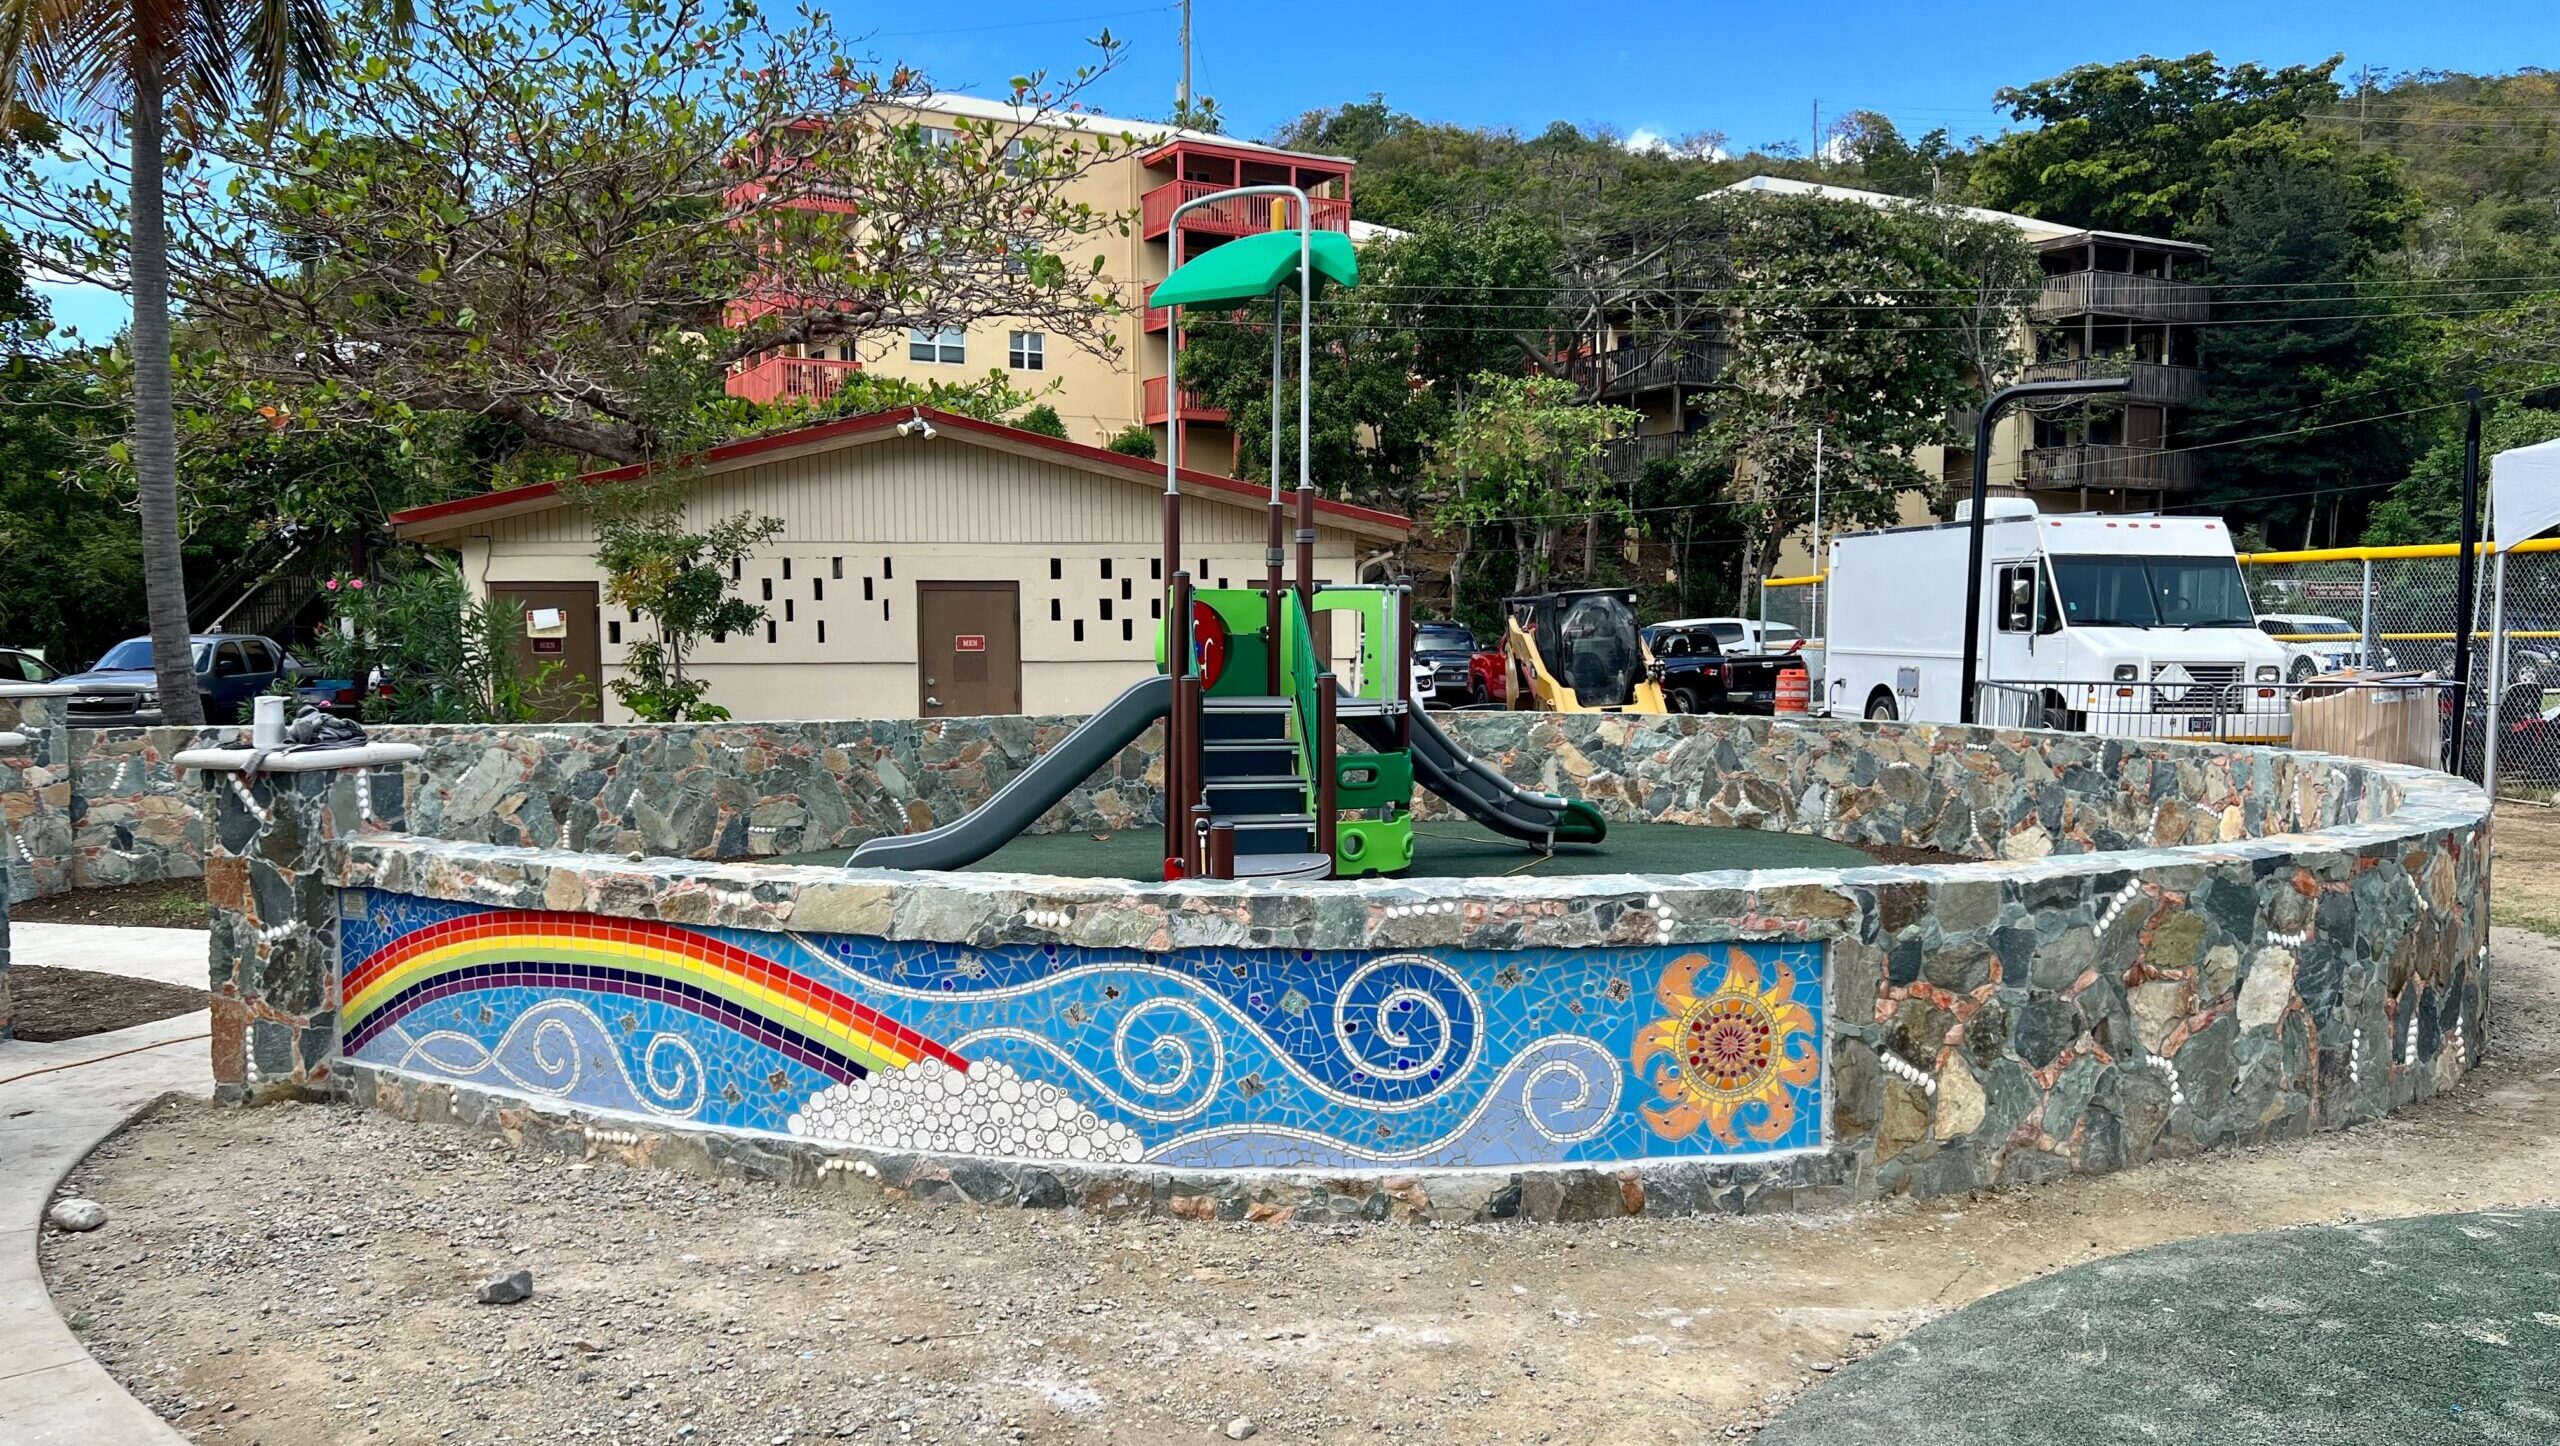 A completed mosaic at the new playground in Cruz Bay on St. John. (Source photo by Amy H. Roberts)